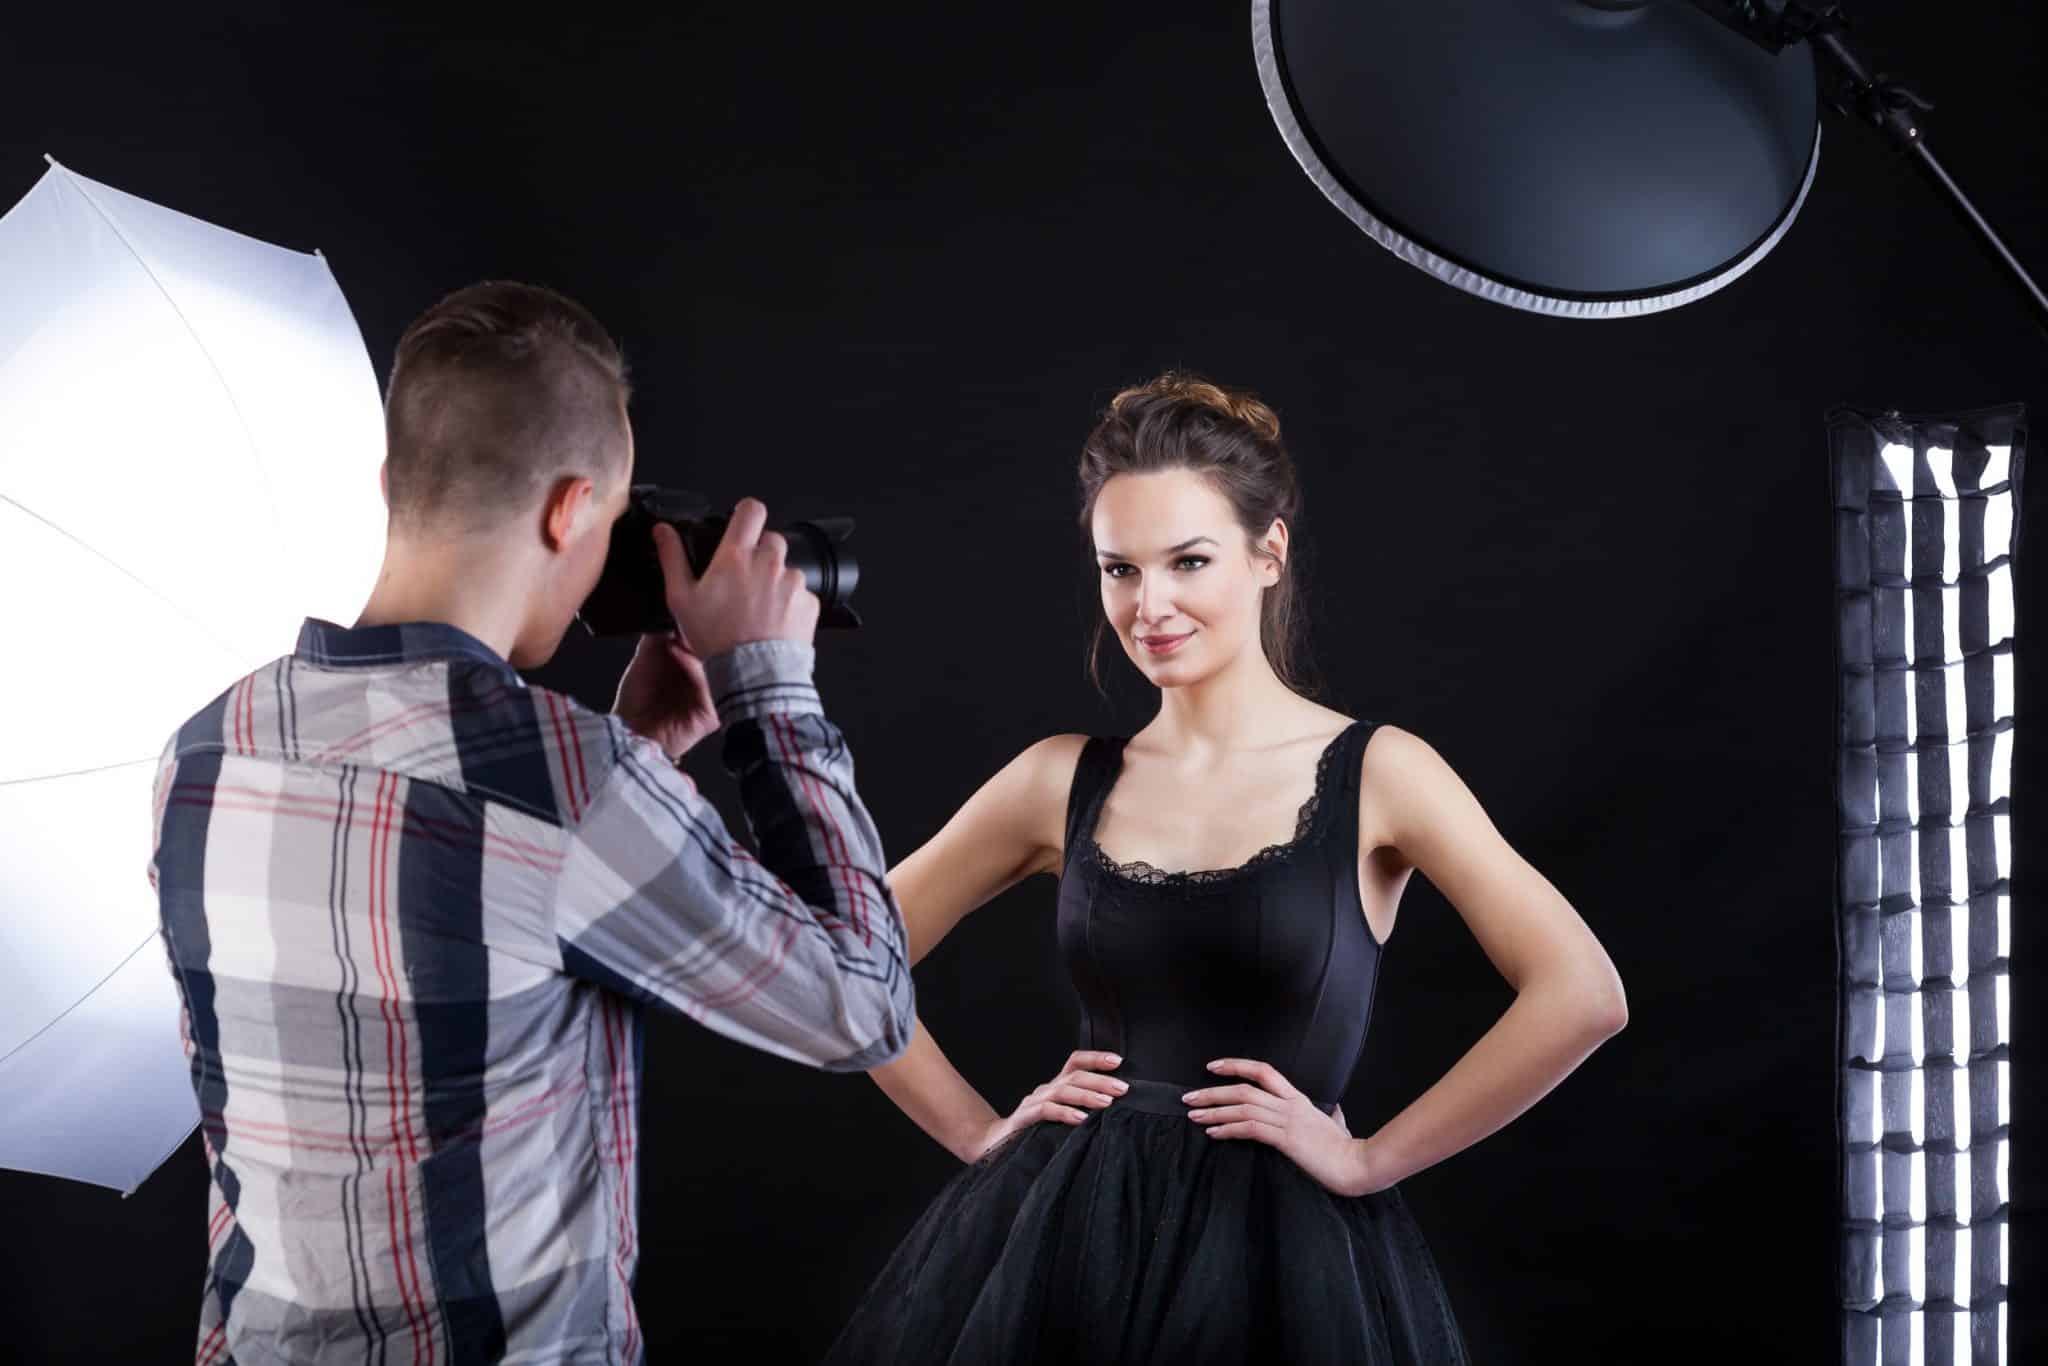 How to be a model: 10 tips for pursuing a professional career